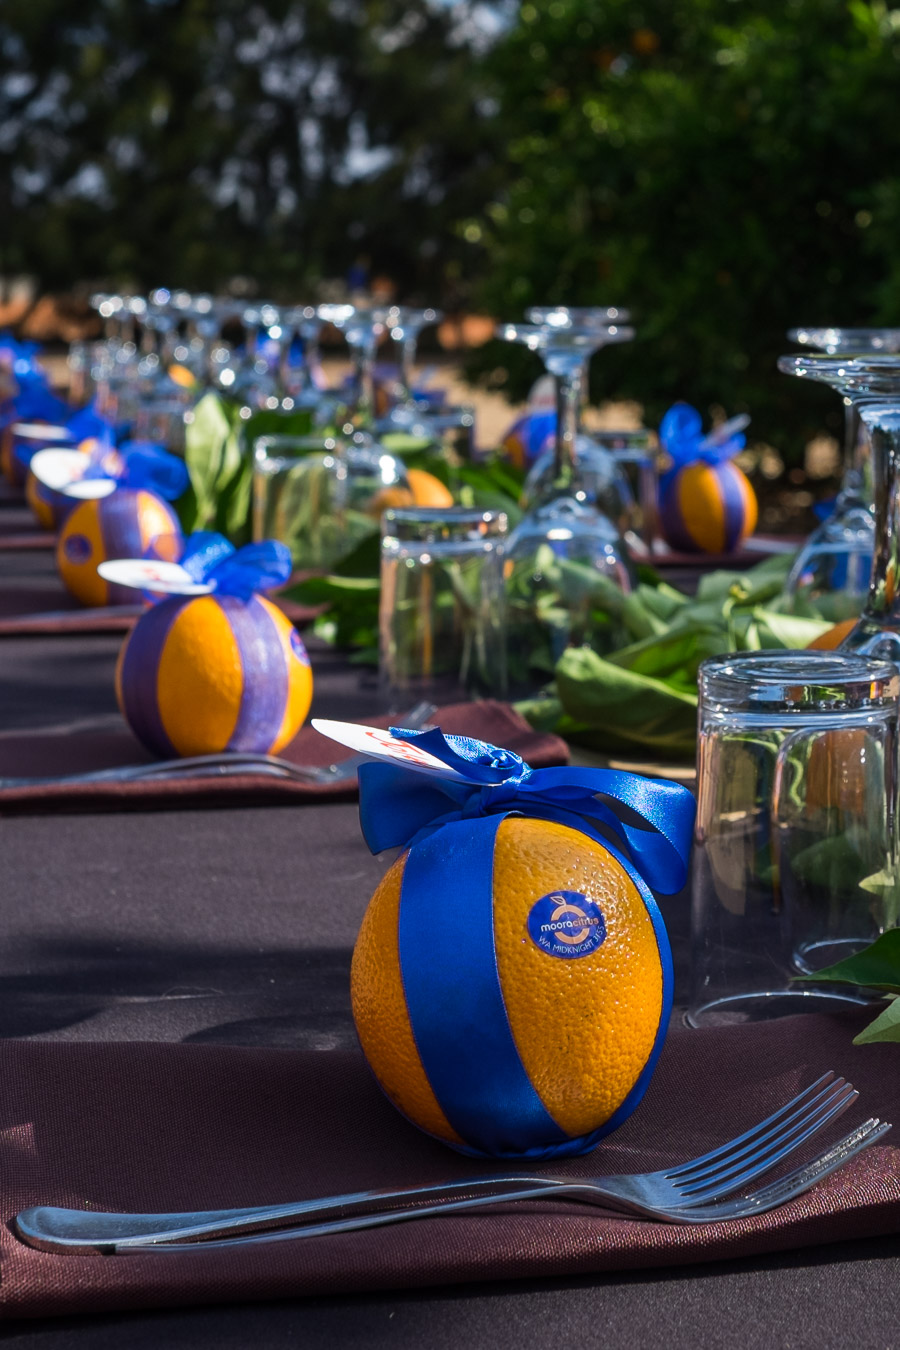 The table setting included a Midknight Summer orange for each guest. 